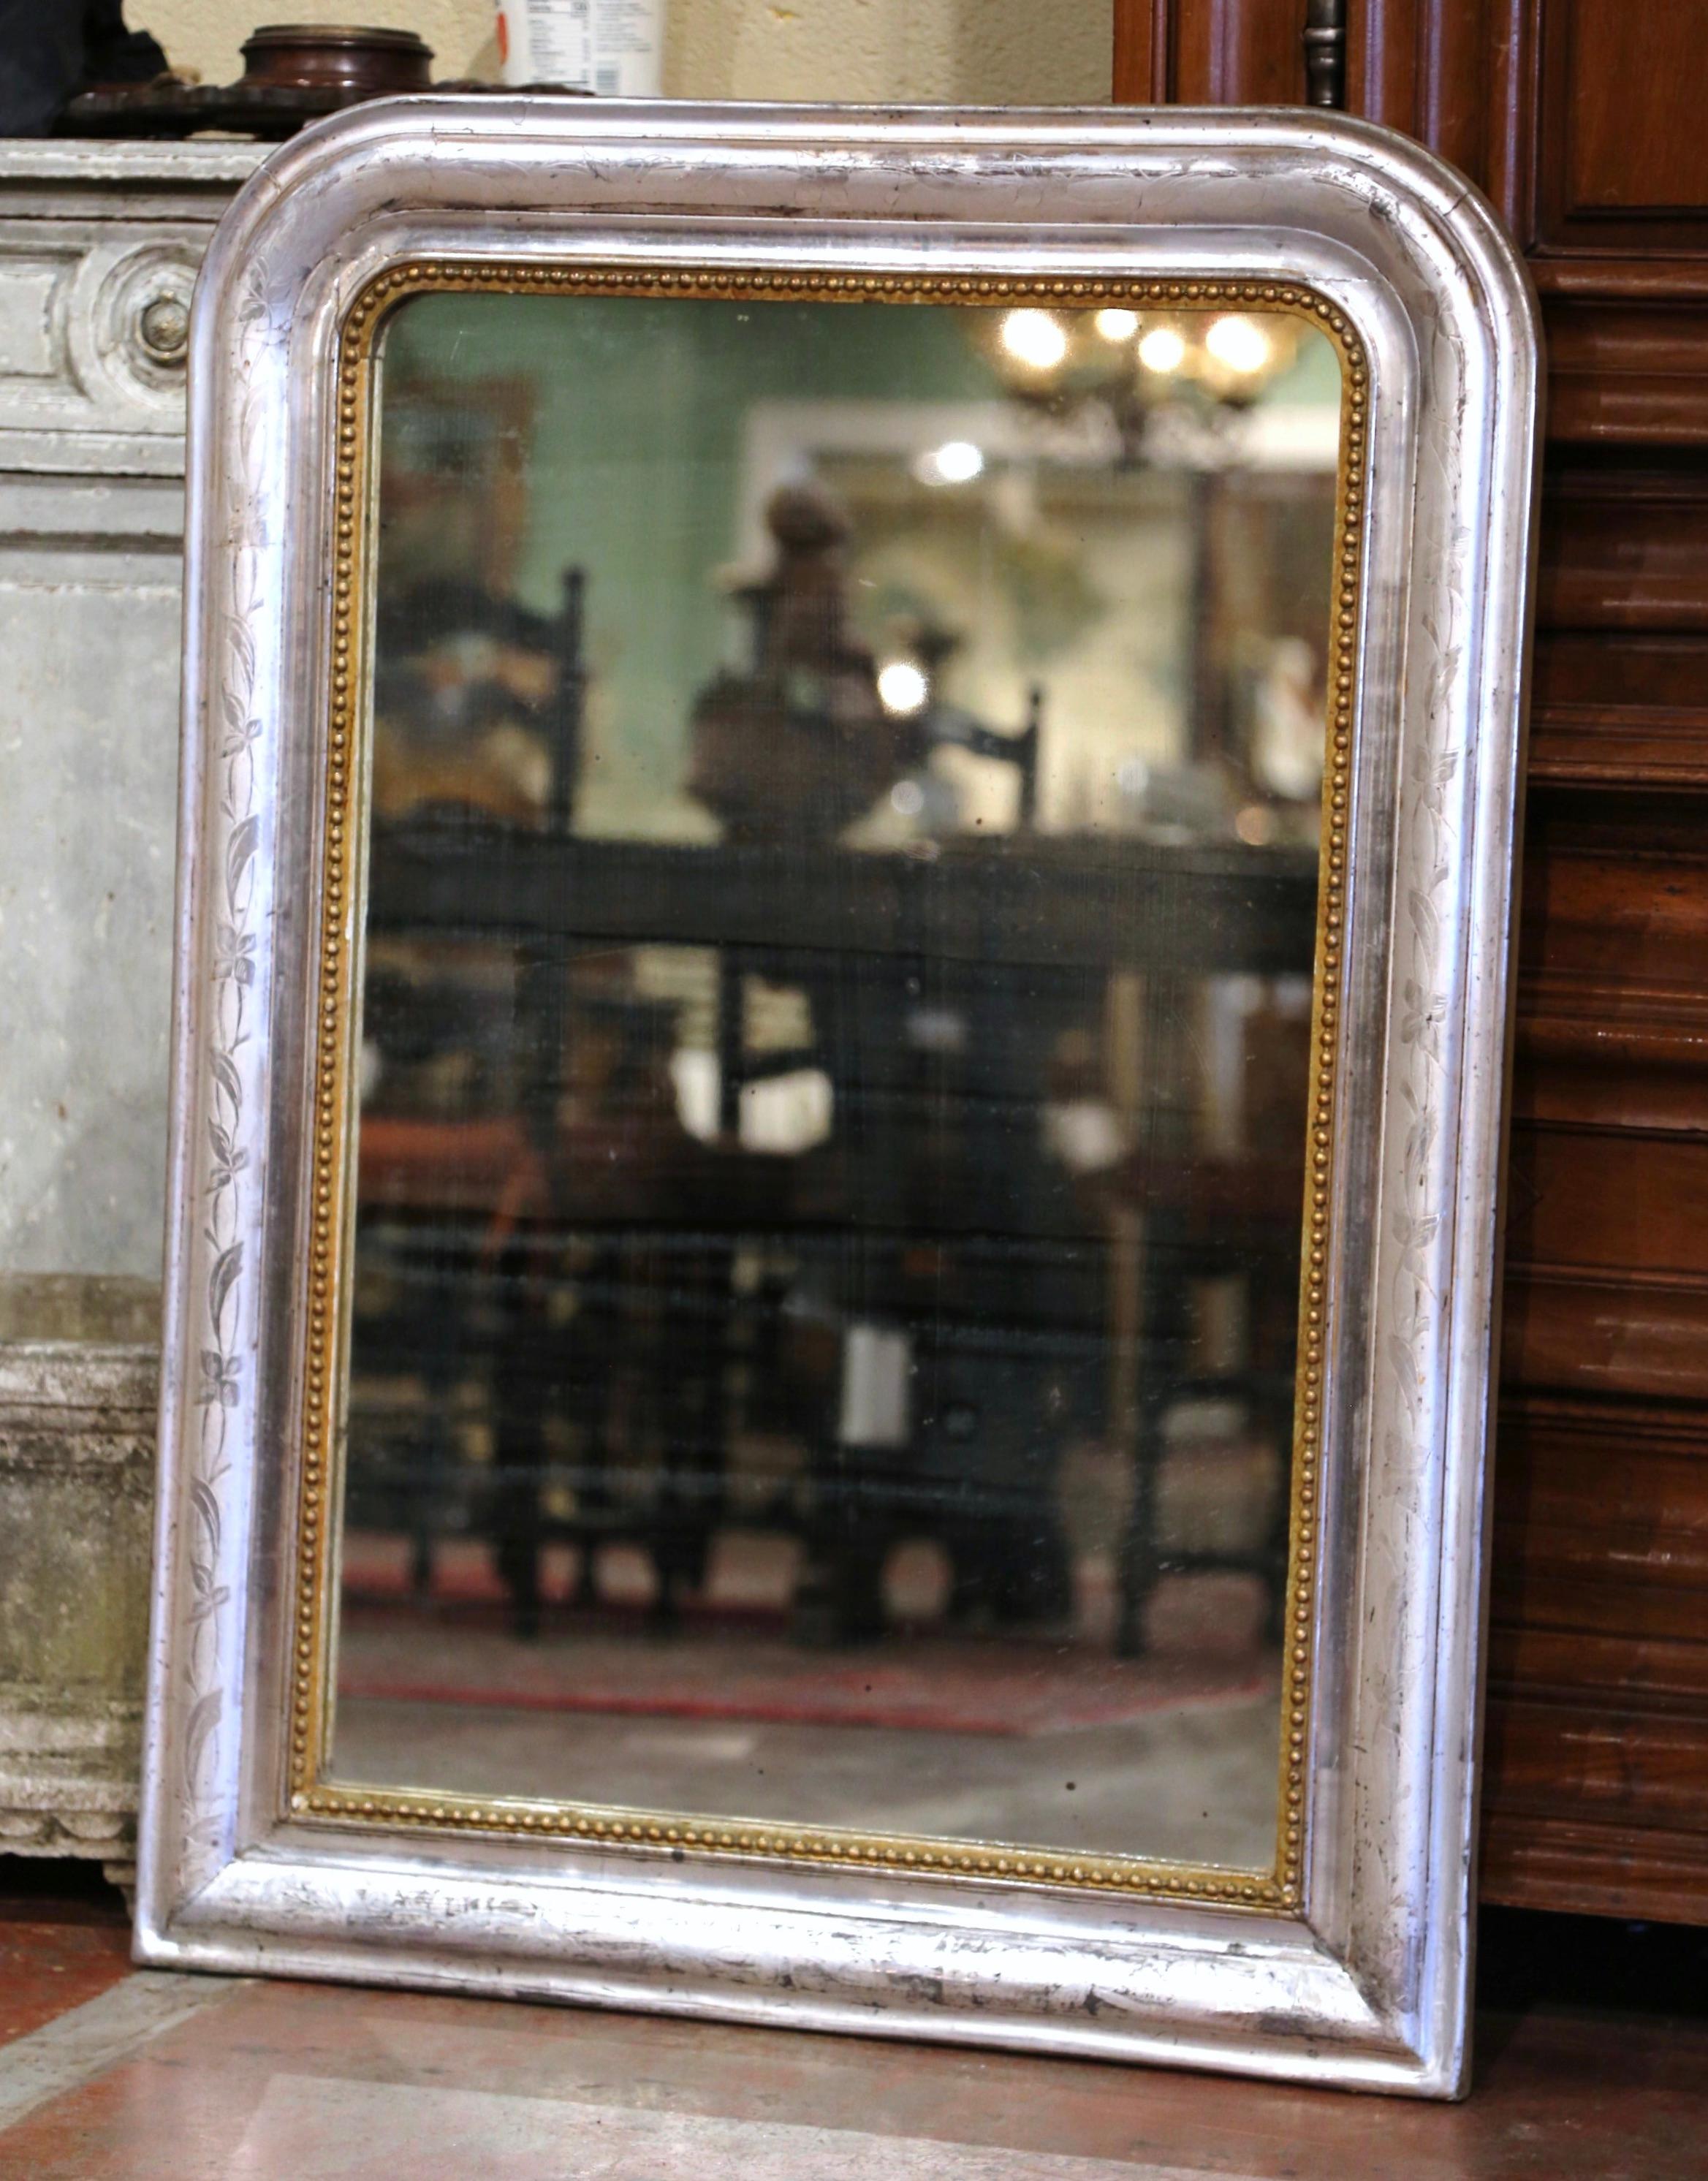 Crafted in the Burgundy region of France, circa 1870, the rectangular antique mirror has traditional, timeless lines with rounded corners. The frame is decorated with a luxurious silver leaf finish over discrete engraved floral motifs, and further